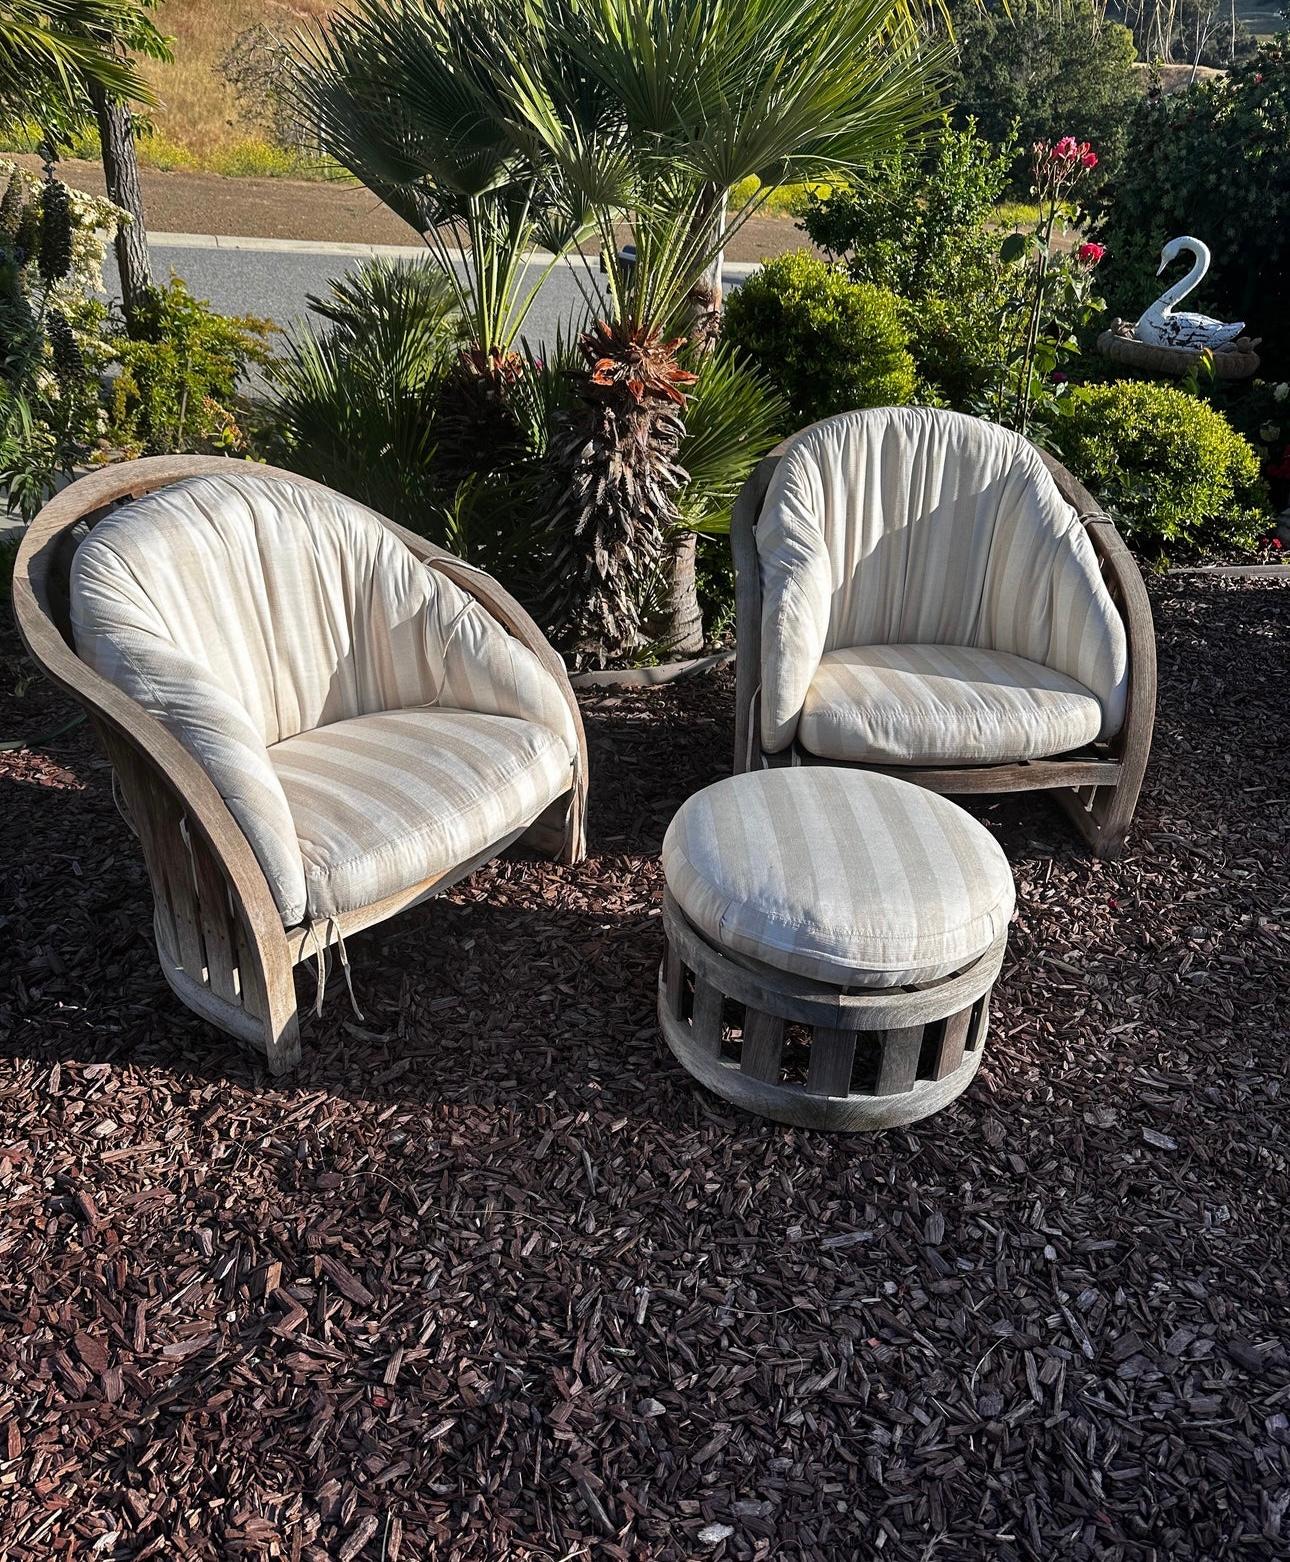 A rare and beautiful designer conversation set by Designer Kipp Stewart made by 
Design for Summit Furniture.
3 piece set
2 Gorgeous deep seaters with cushions, and round coffee table
Great in any home or Estate
A great focal point in any place made